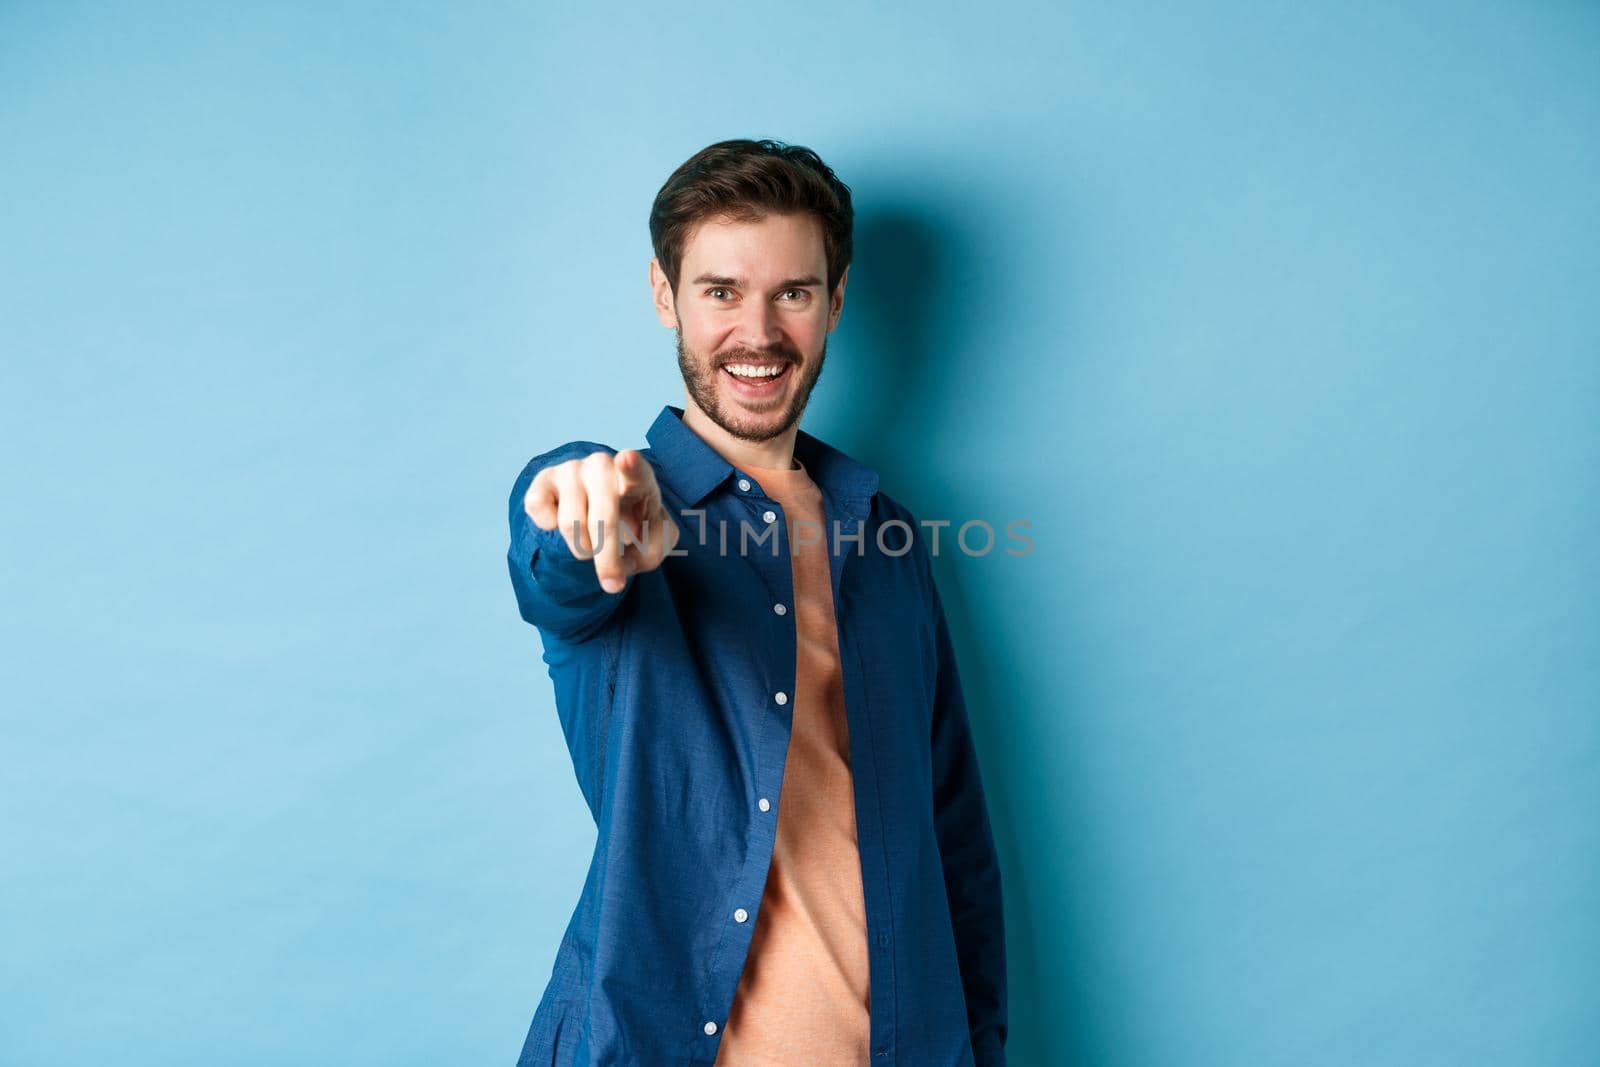 Confident smiling guy choosing or inviting you, pointing finger at camera decisive, standing on blue background. Copy space